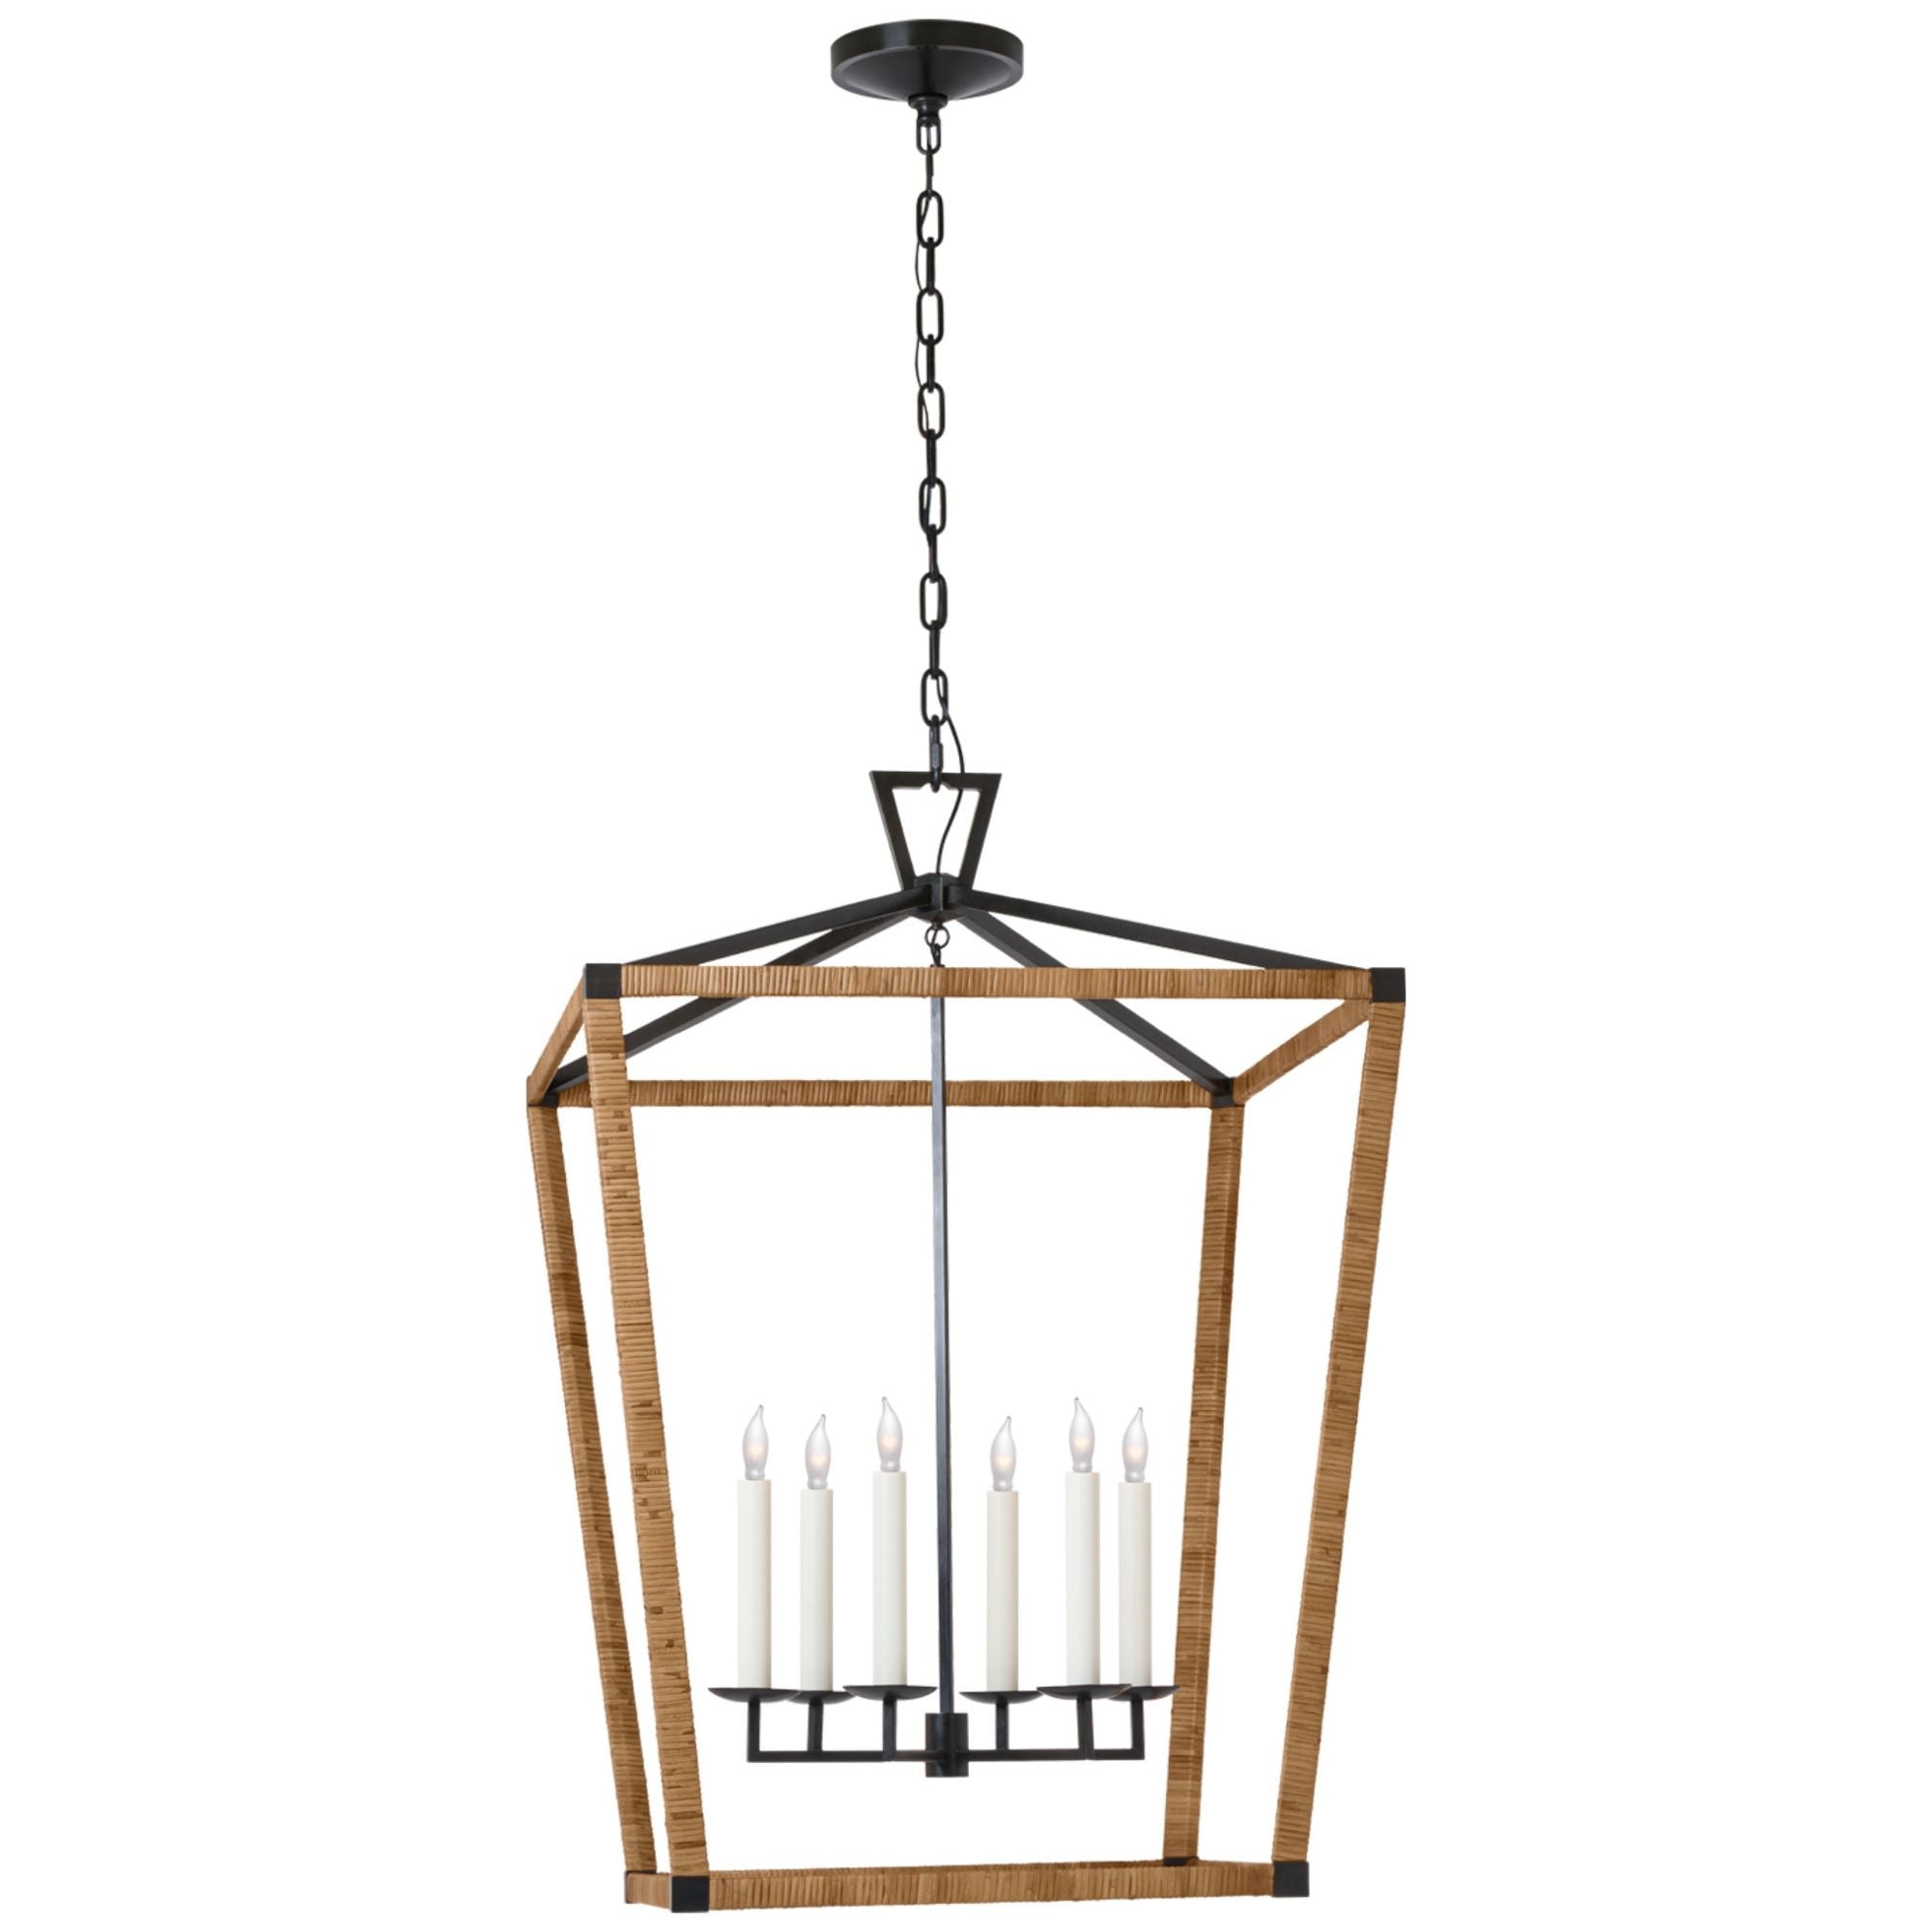 Chapman & Myers Darlana XL Wrapped Lantern in Aged Iron and Natural Rattan